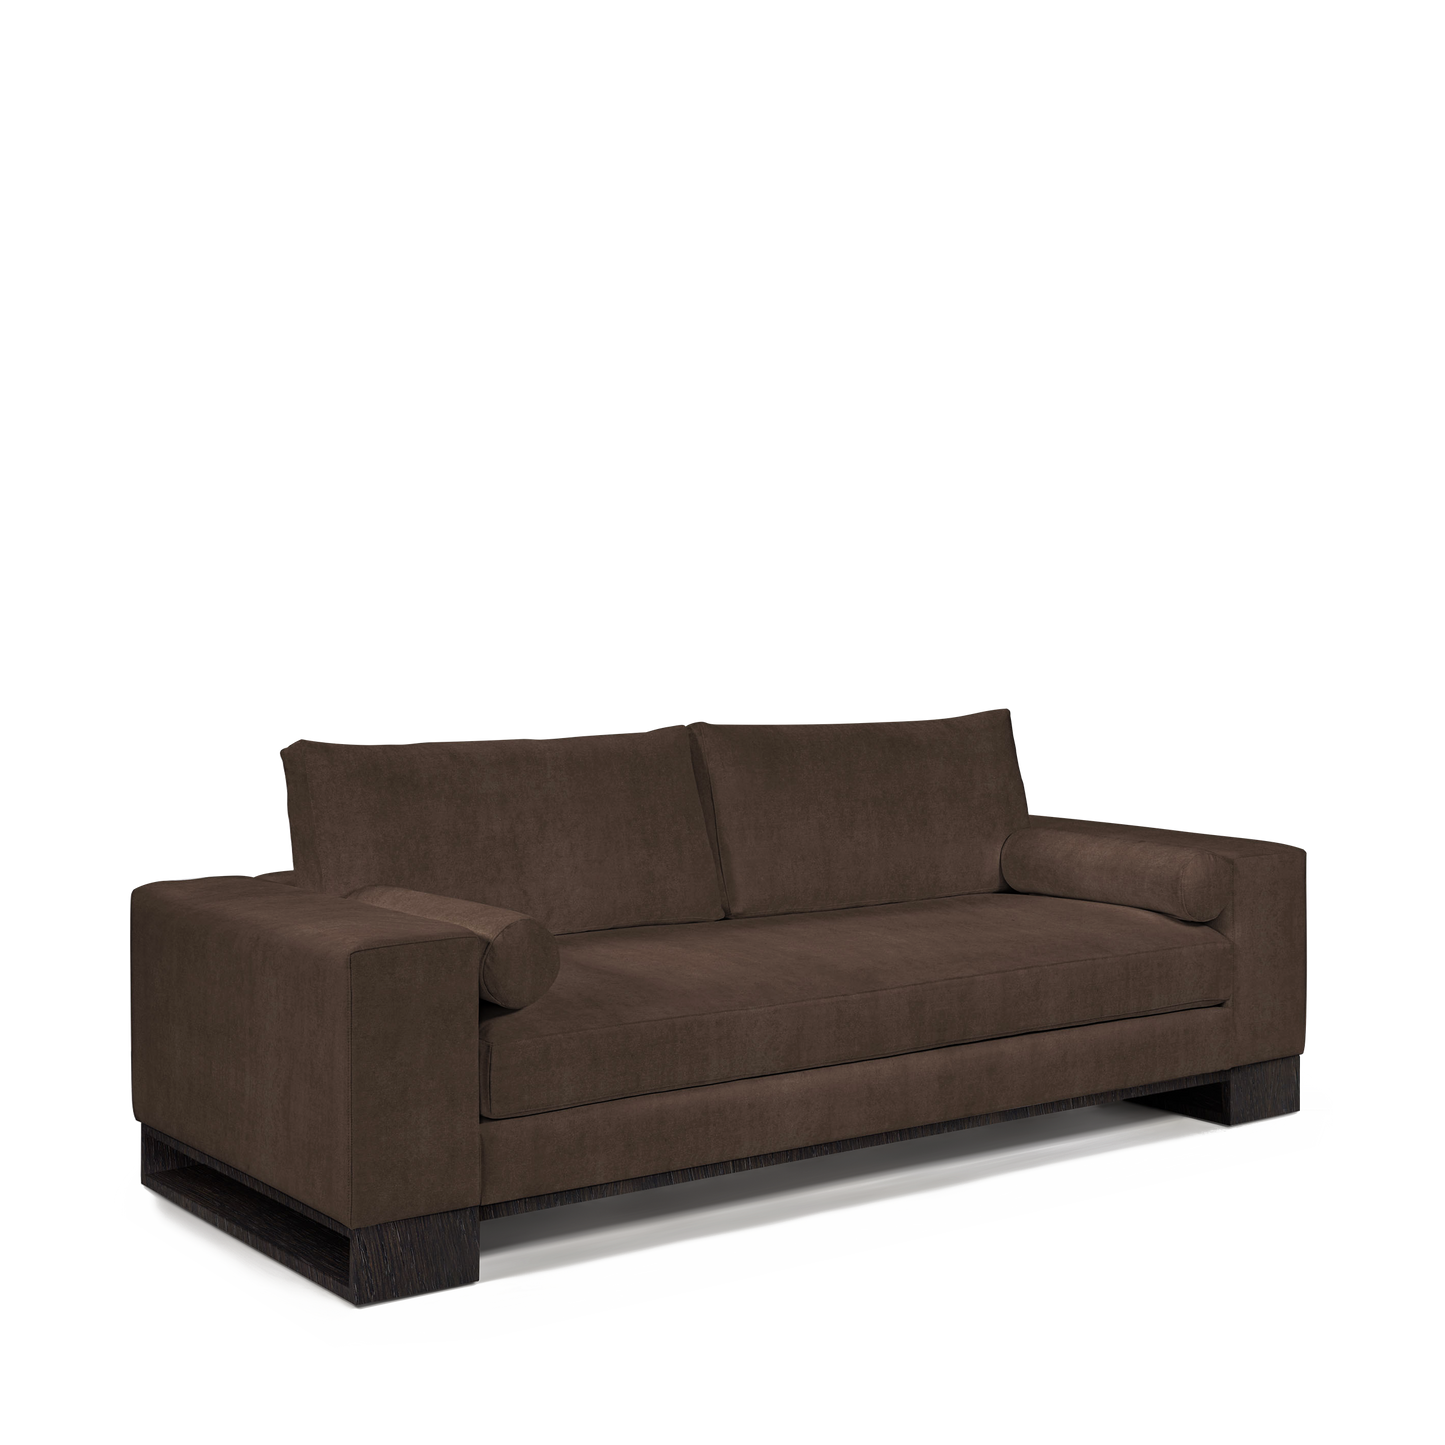 TERRA 2,5-seater sofa  with suede brown textile and chocolate wood legs 